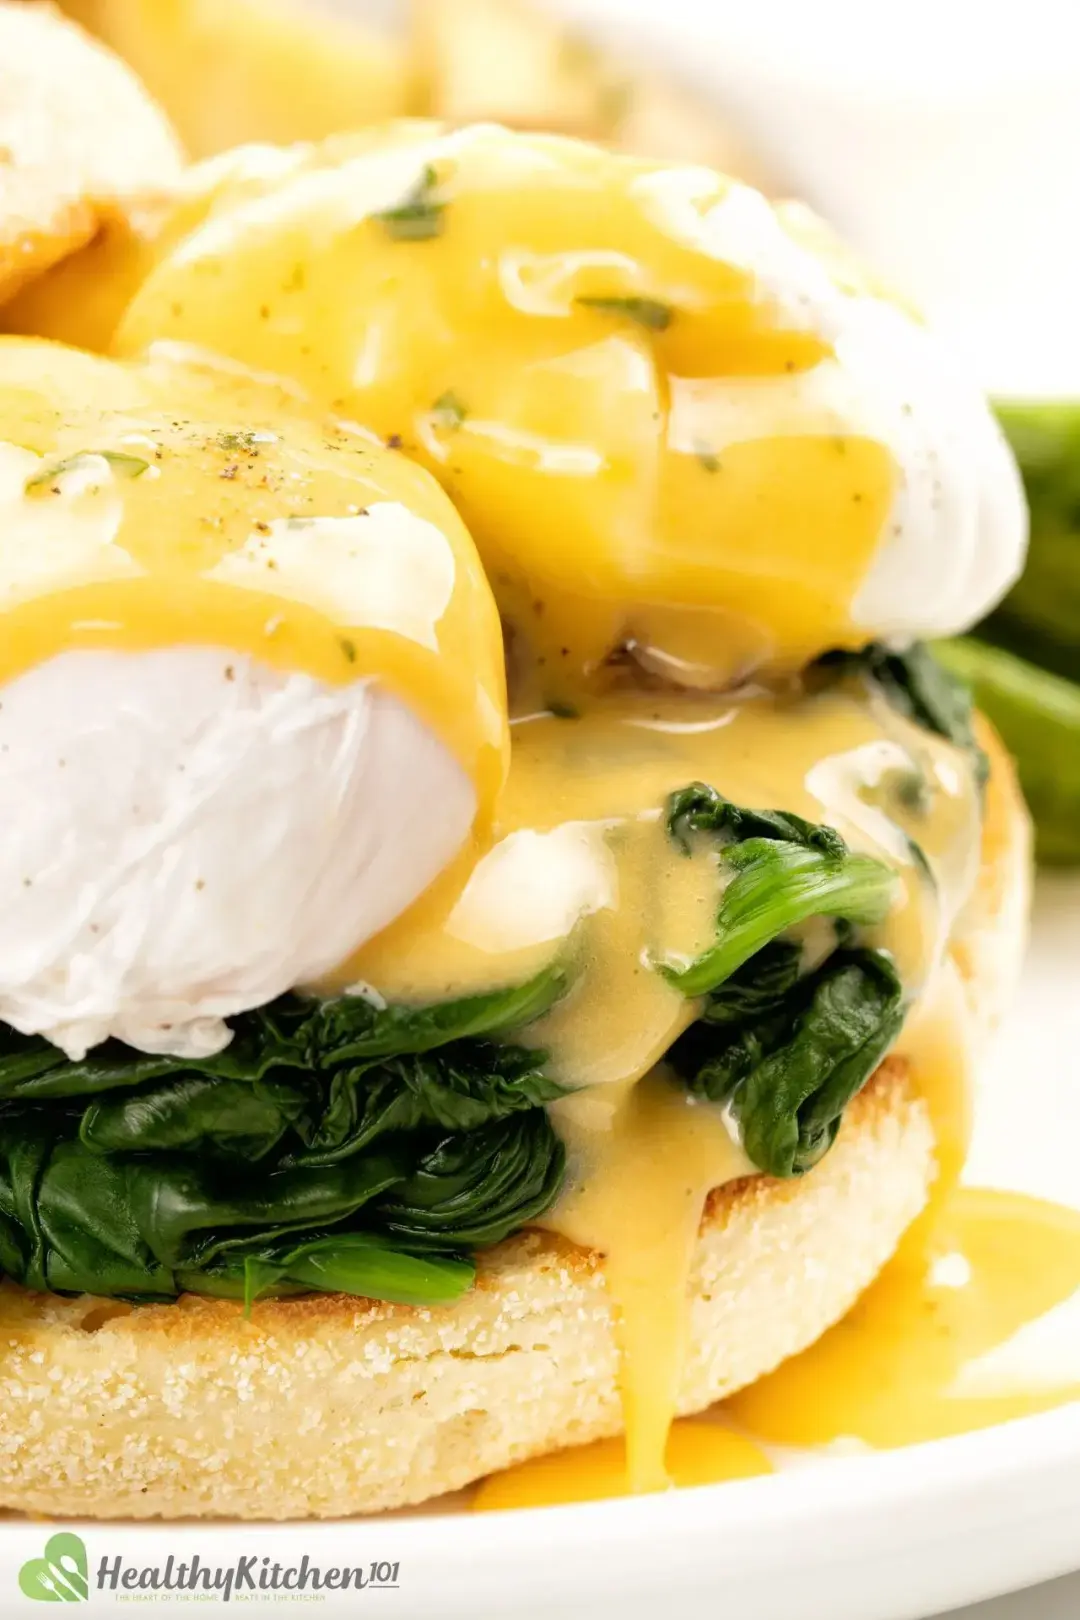 Tips for Making Eggs Benedict